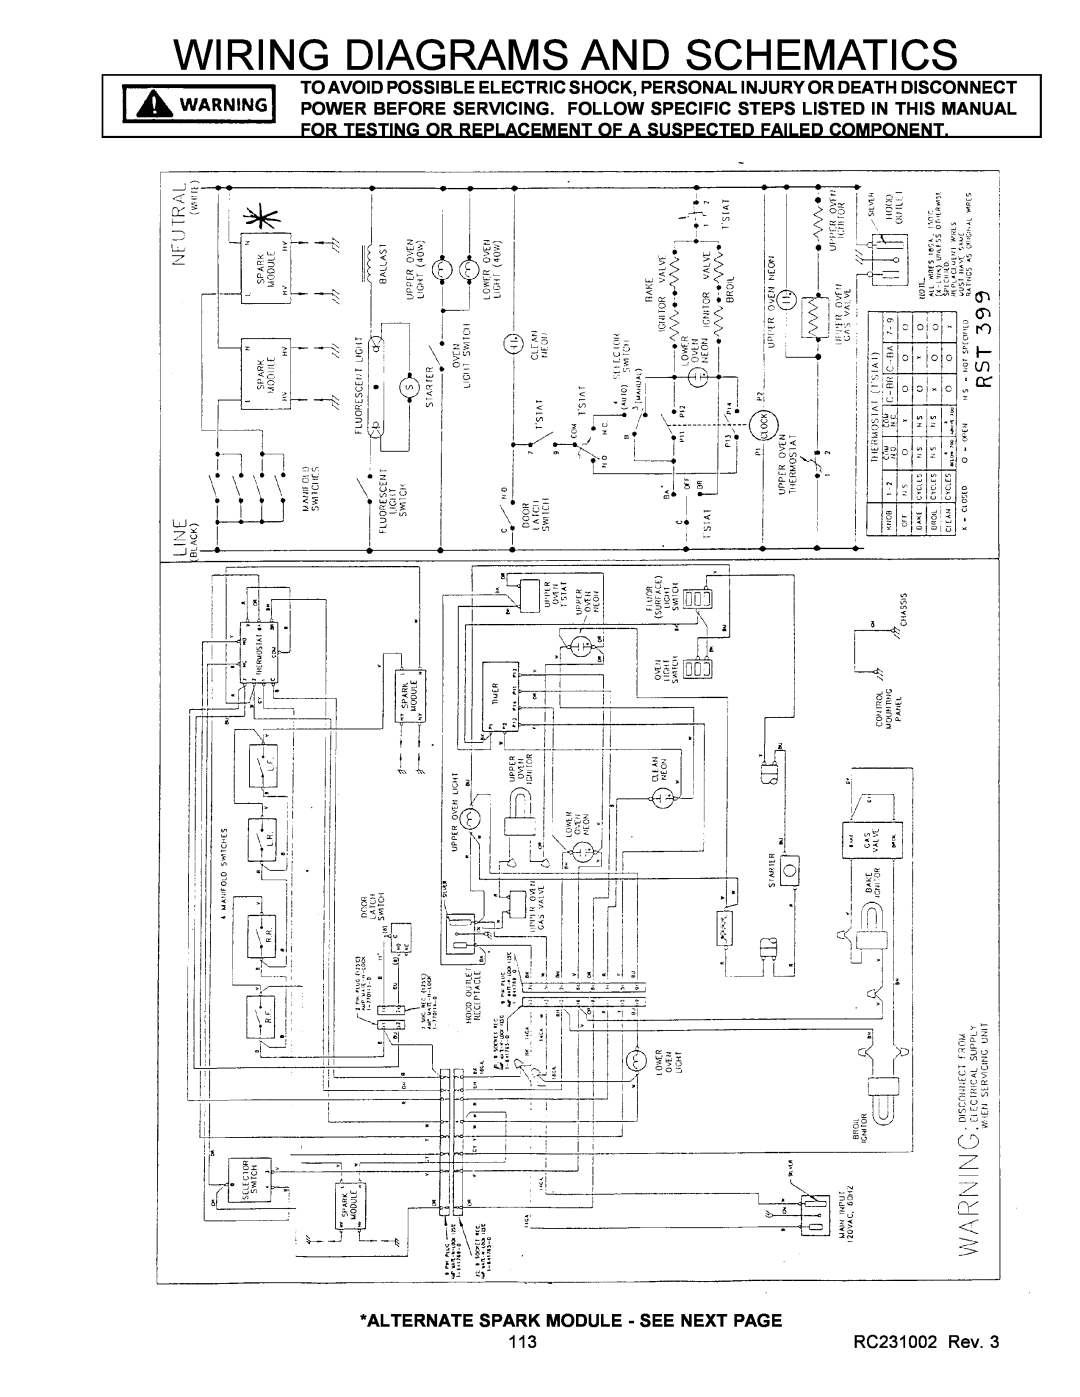 Amana RSS, RST service manual Alternate Spark Module - See Next Page, Wiring Diagrams And Schematics 